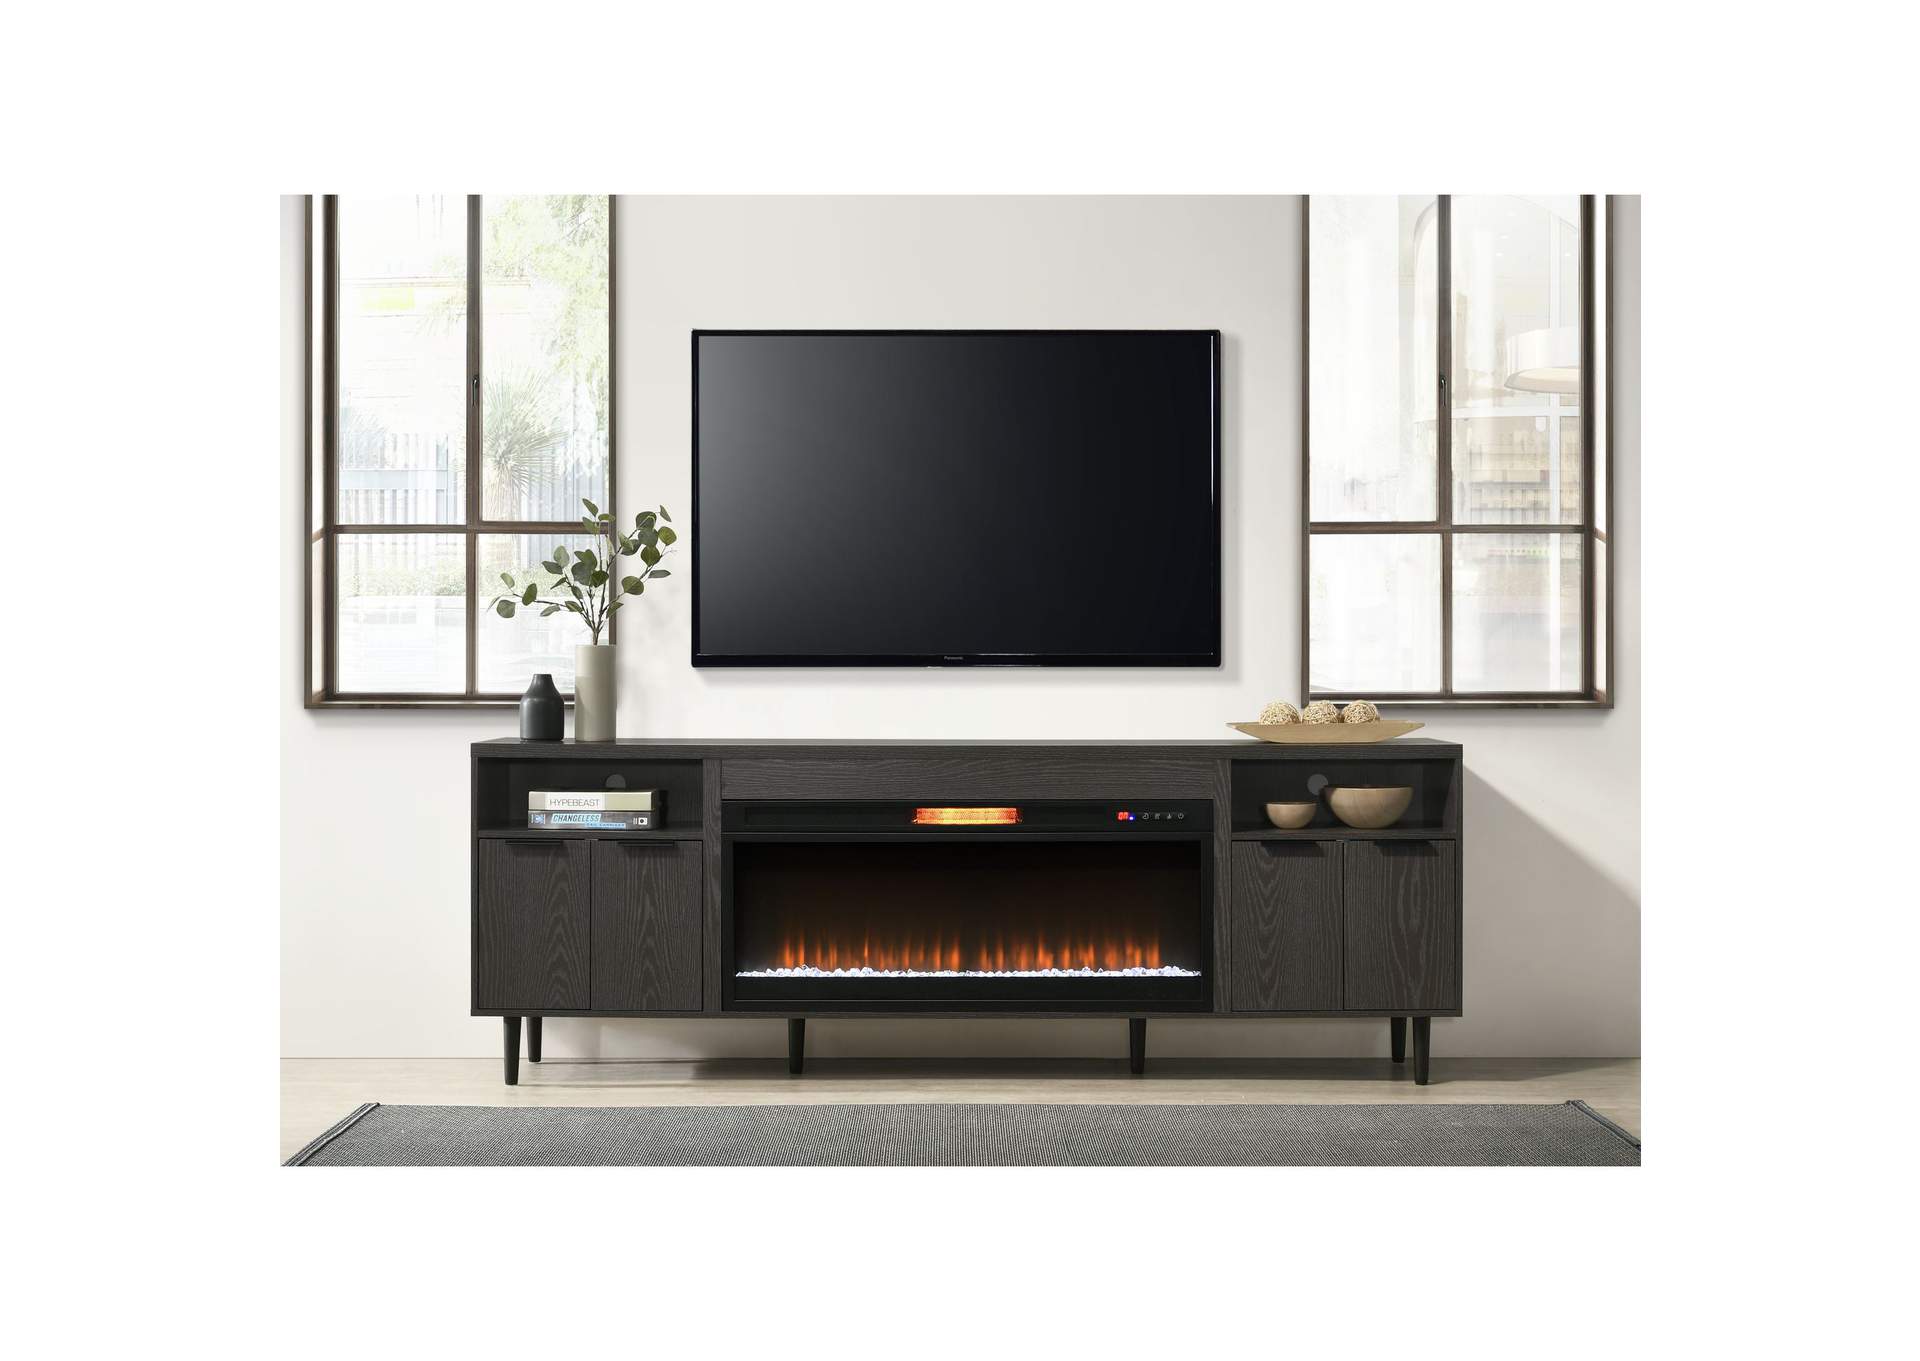 Athena 85 Complete Fireplace In Espresso,Elements